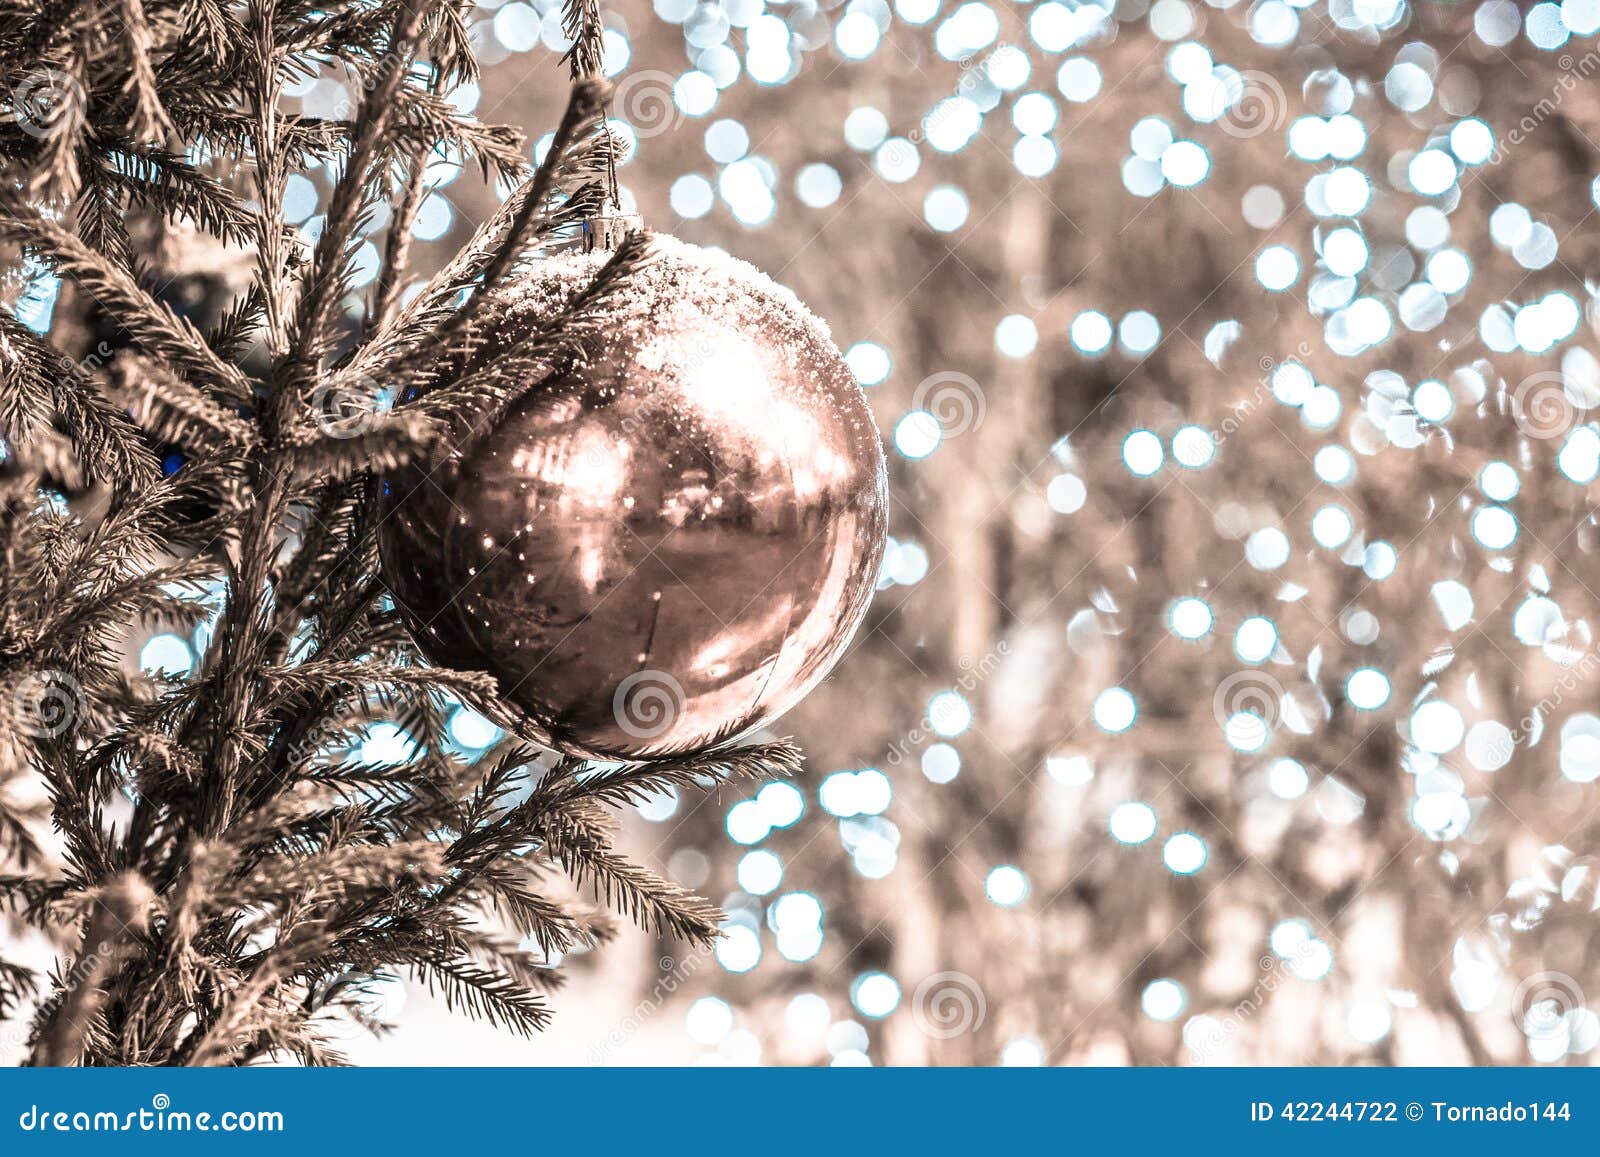 snow covered decoration ball on a christmas tree. desaturated